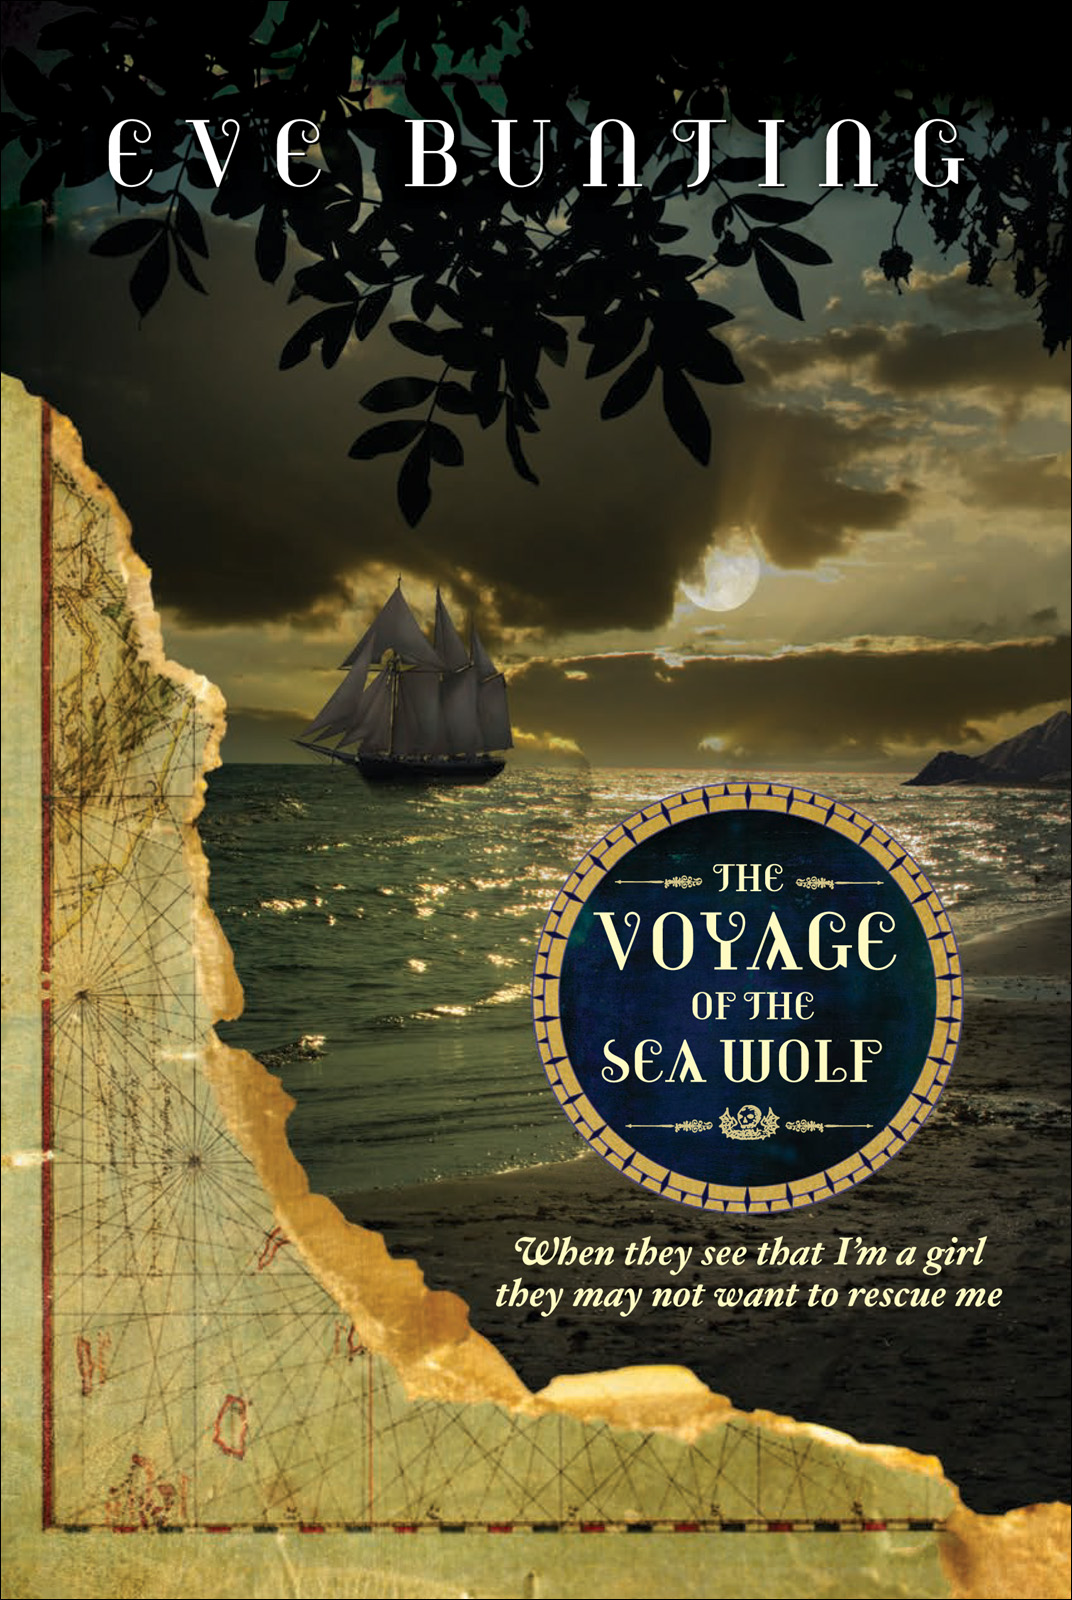 The Voyage of the Sea Wolf (2012) by Eve Bunting